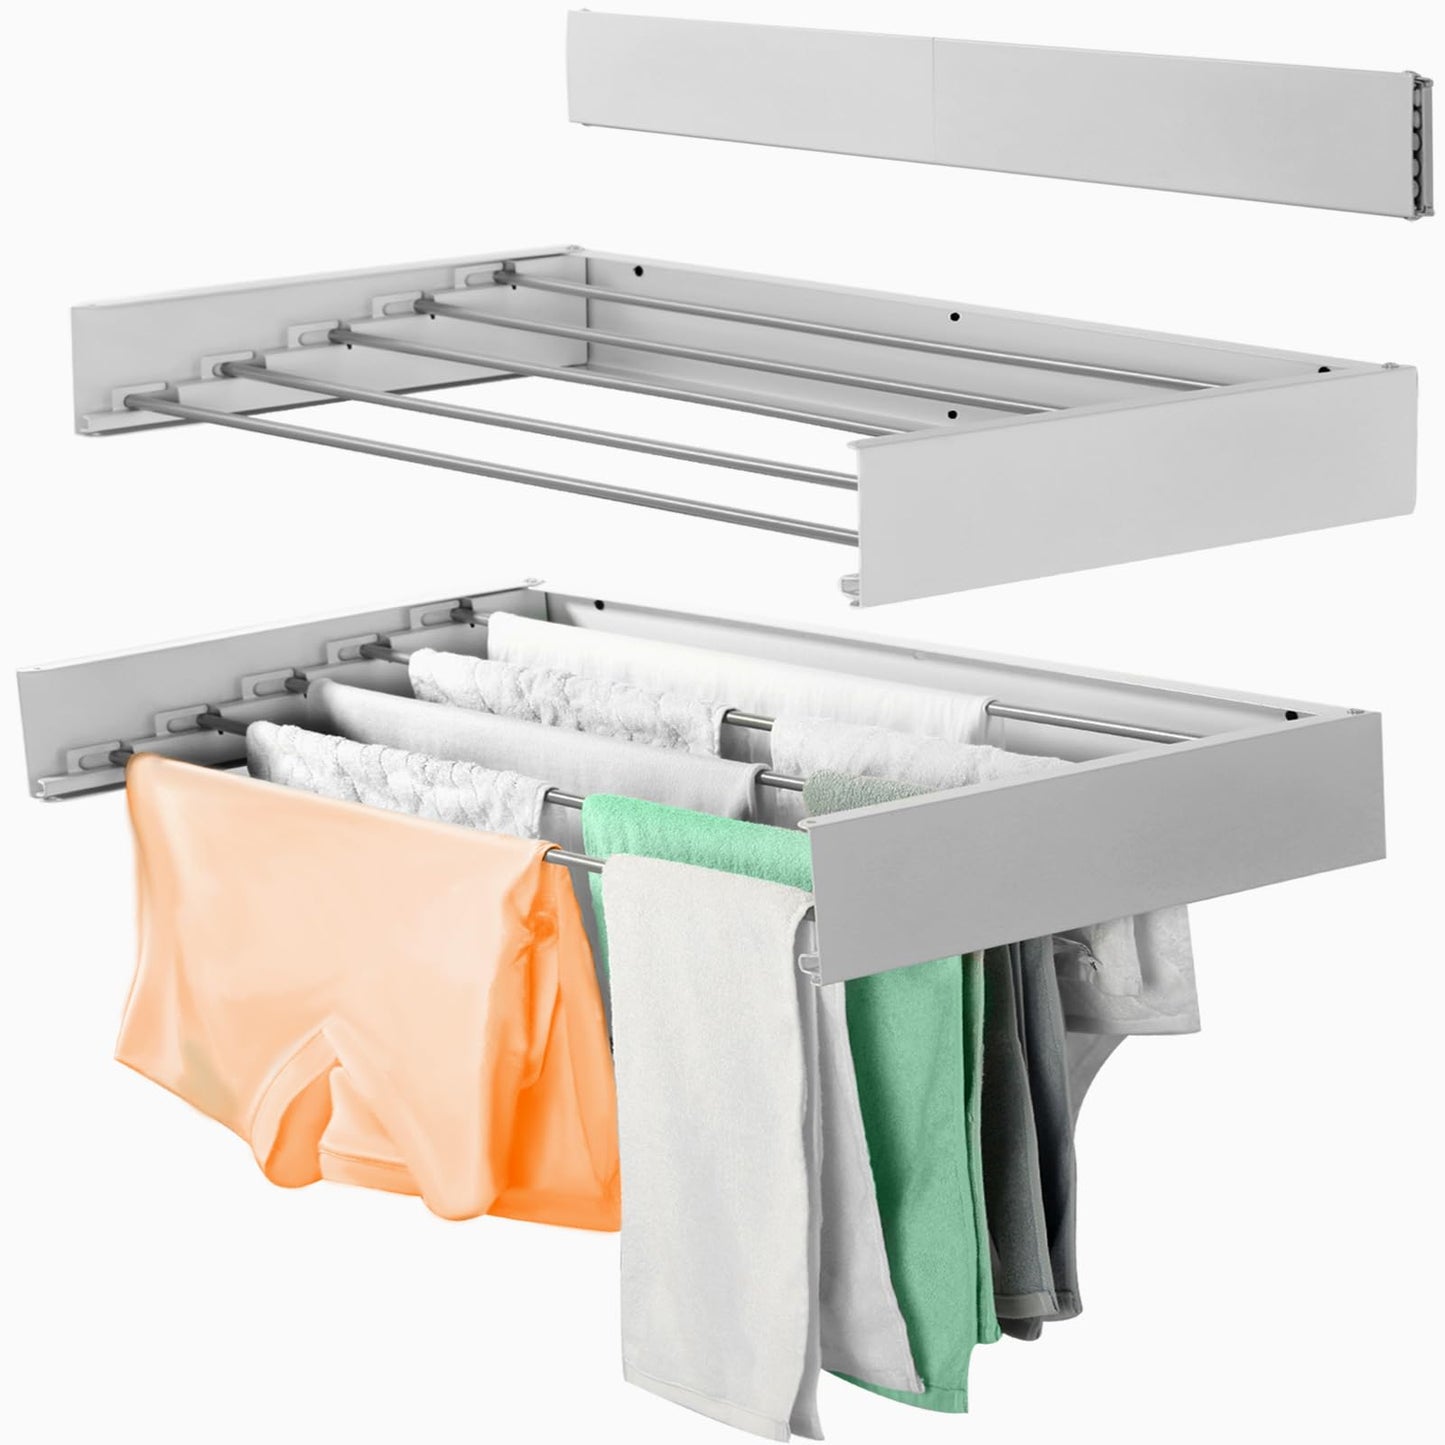 Laundry Drying Rack Collapsible, 40" Foldable Wall Mounted Clothes and Towel Drying Rack with Wall Template- 5 Rods, 60lb Capacity, Mounted Hanger Perfect for Laundry, Bathroom, and More